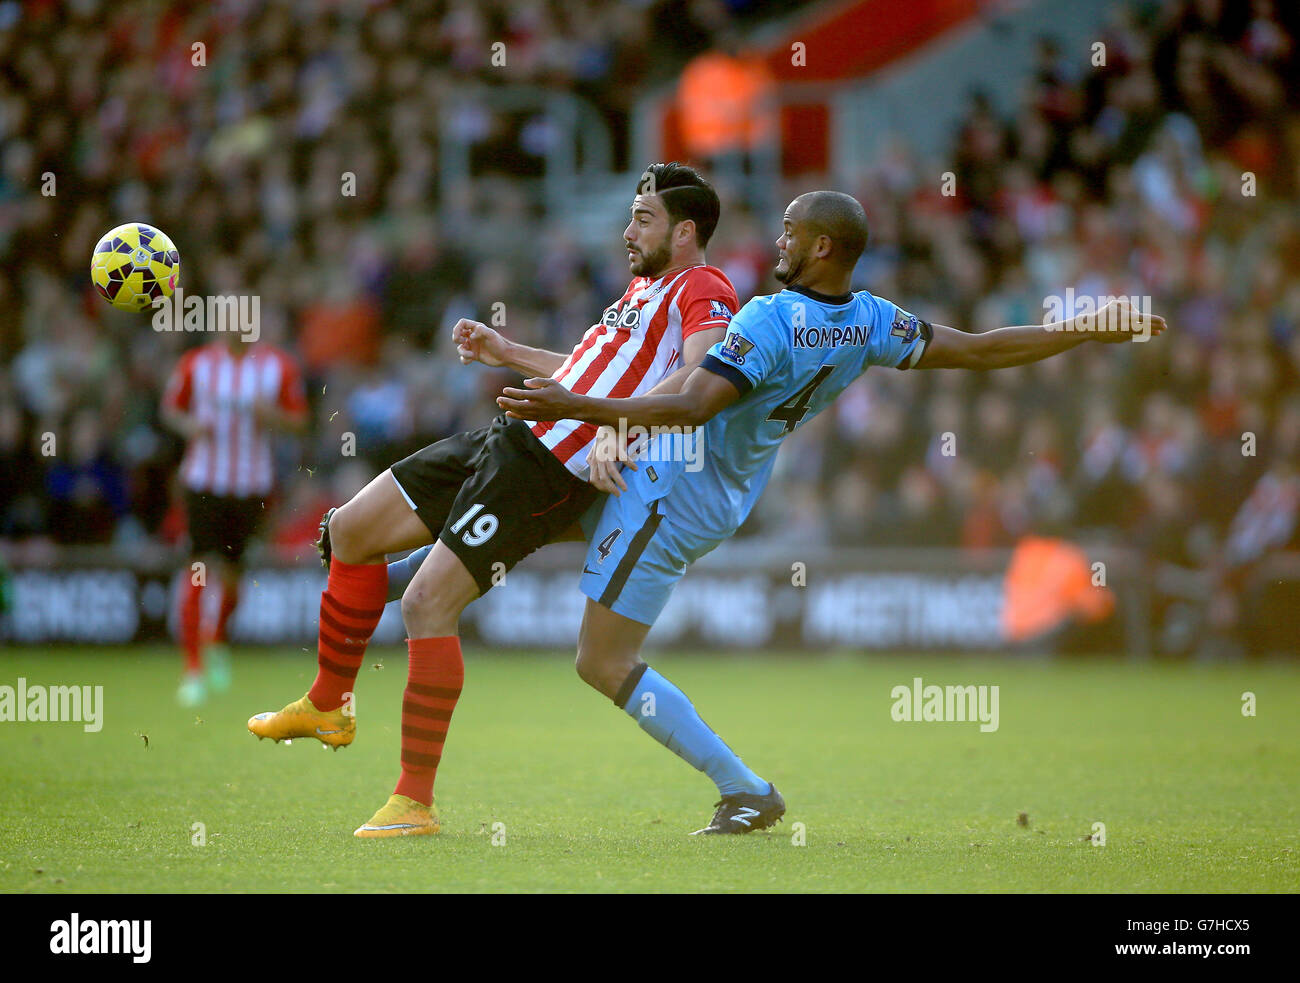 Southampton's Graziano Pelle battles for the ball with Manchester City's Vincent Kompany during the Barclays Premier League match at St Mary's Stadium, Southampton. PRESS ASSOCIATION Photo. Picture date: Sunday November 30, 2014. See PA story SOCCER Southampton. Photo credit should read Nick Potts/PA Wire. Maximum 45 images during a match. No video emulation or promotion as 'live'. No use in games, competitions, merchandise, betting or single club/player services. No use with unofficial audio, video, data, fixtures or club/league logos. Stock Photo